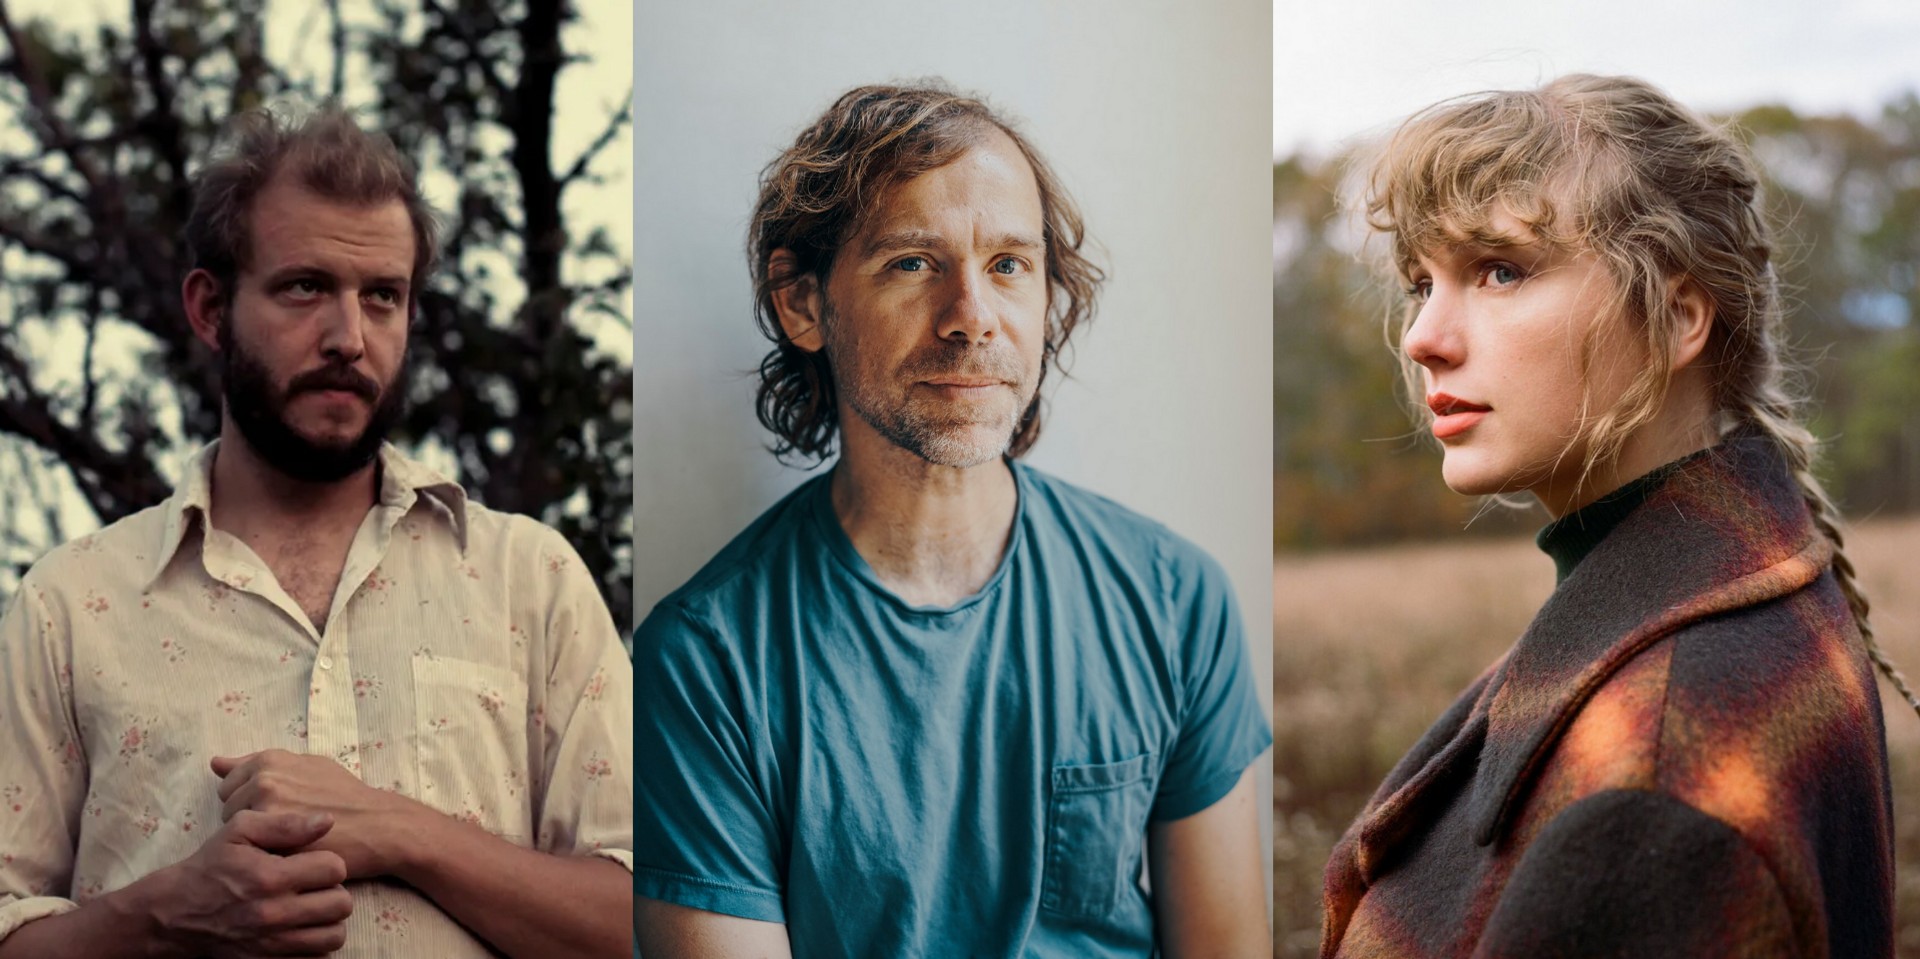 Big Red Machine’s Aaron Dessner and Justin Vernon reunite with Taylor Swift in ‘Renegade’ - watch